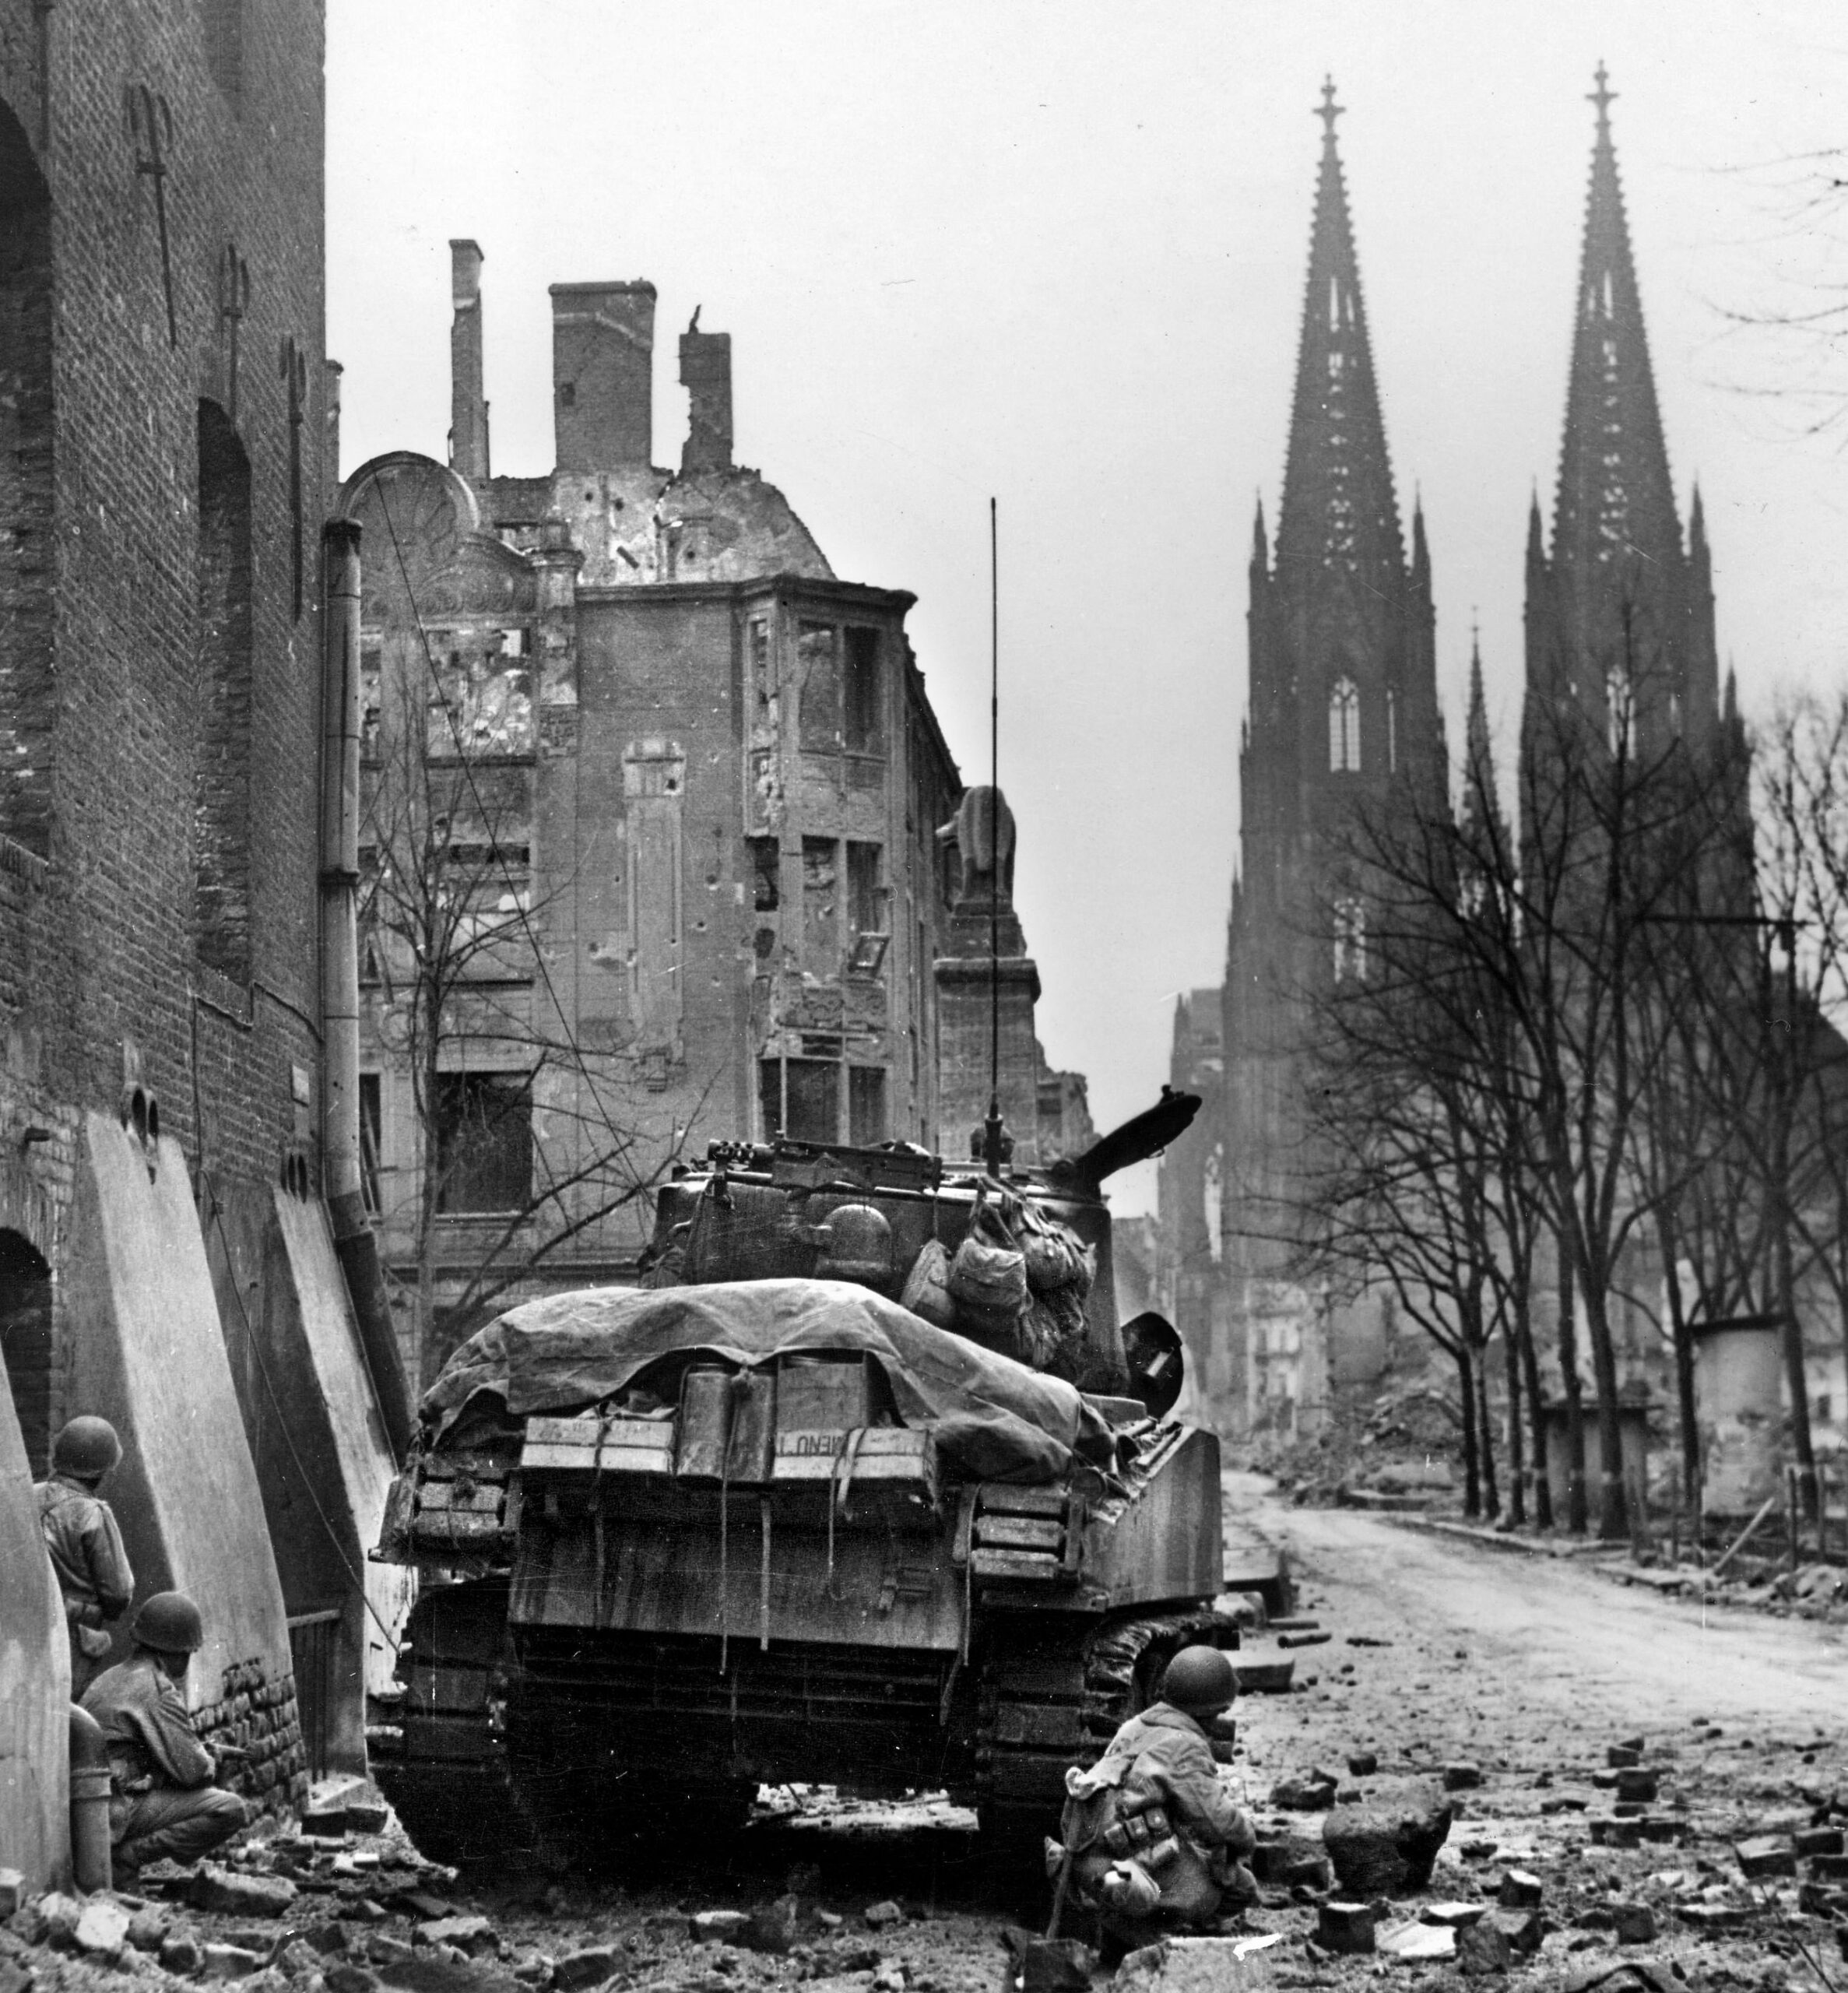 U.S. soldiers squat behind a tank and building as they fight to capture Cologne on March 6, 1945. PFC Cohn almost lost his life to a German mortar barrage in the city.